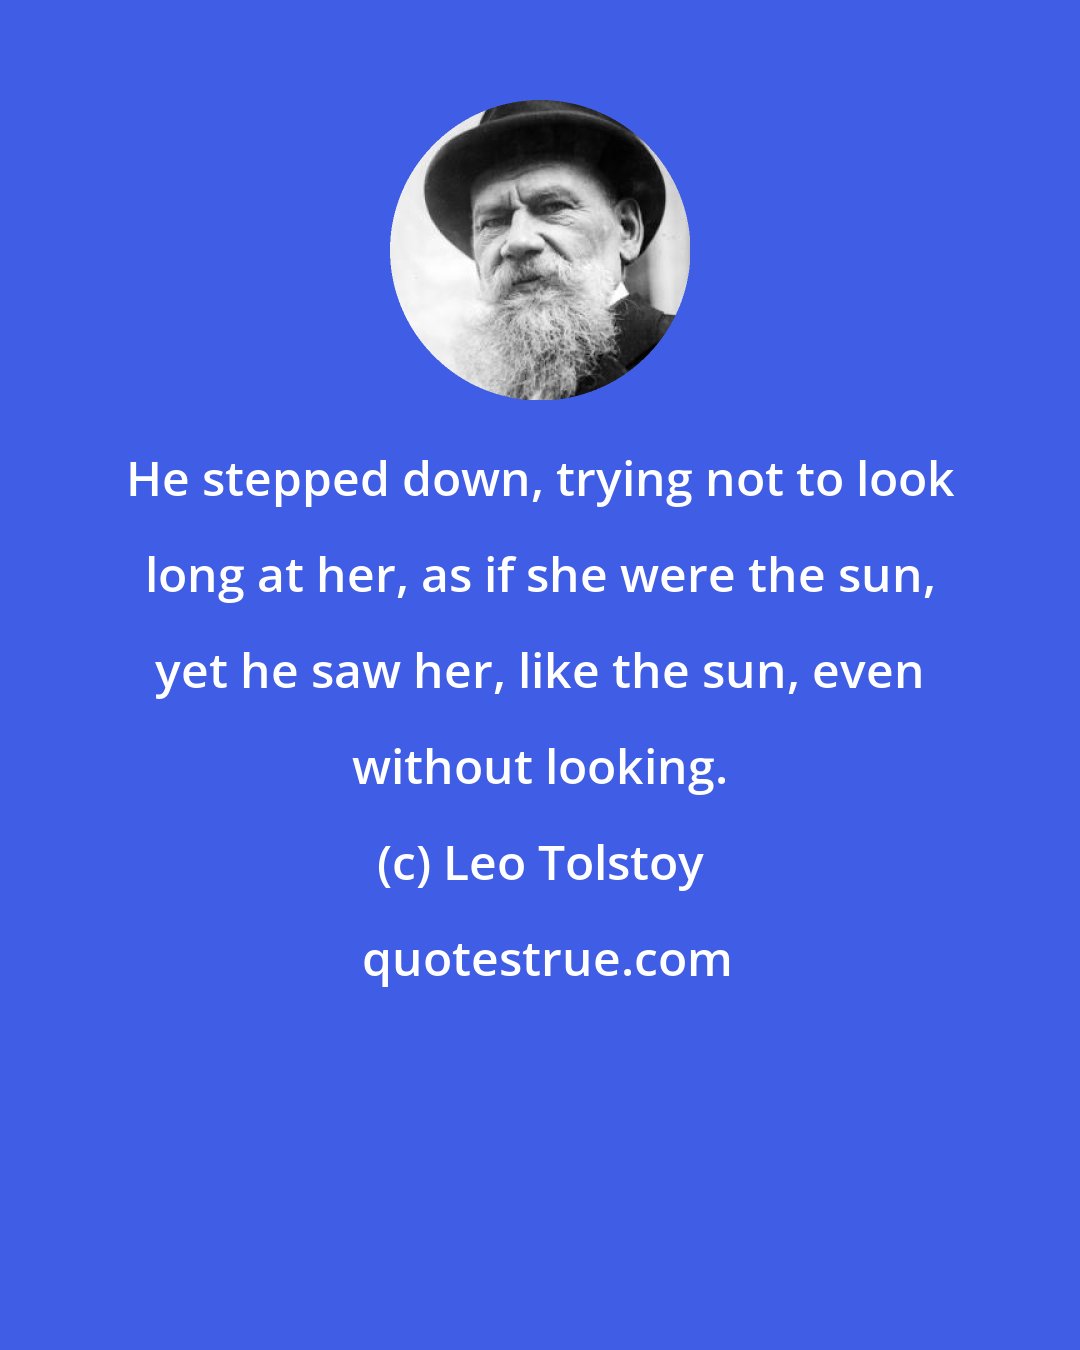 Leo Tolstoy: He stepped down, trying not to look long at her, as if she were the sun, yet he saw her, like the sun, even without looking.